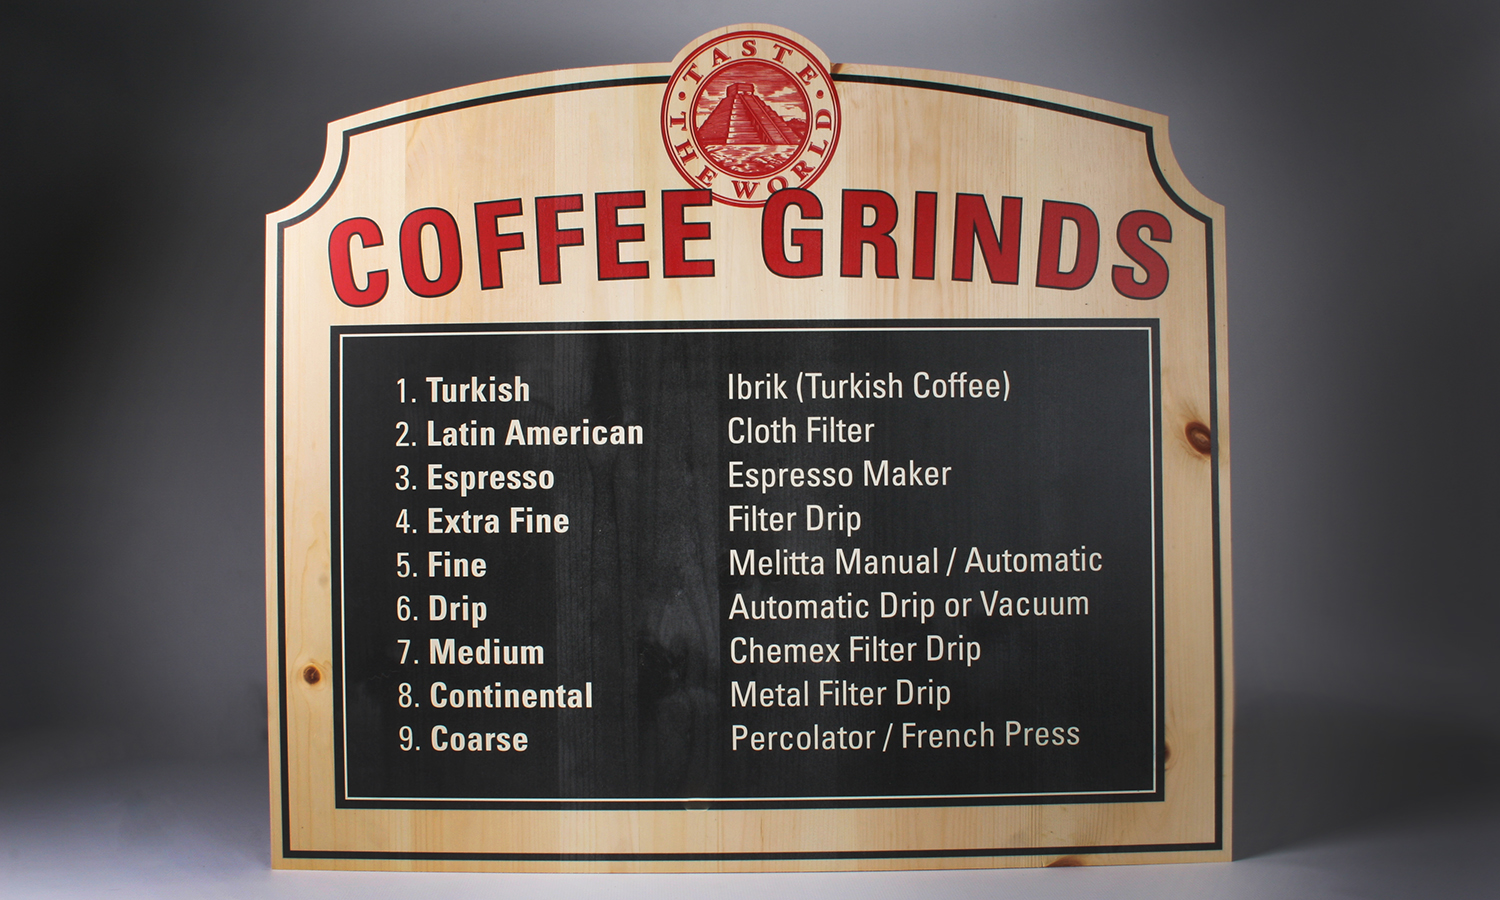 Coffe Grinds Store Sign